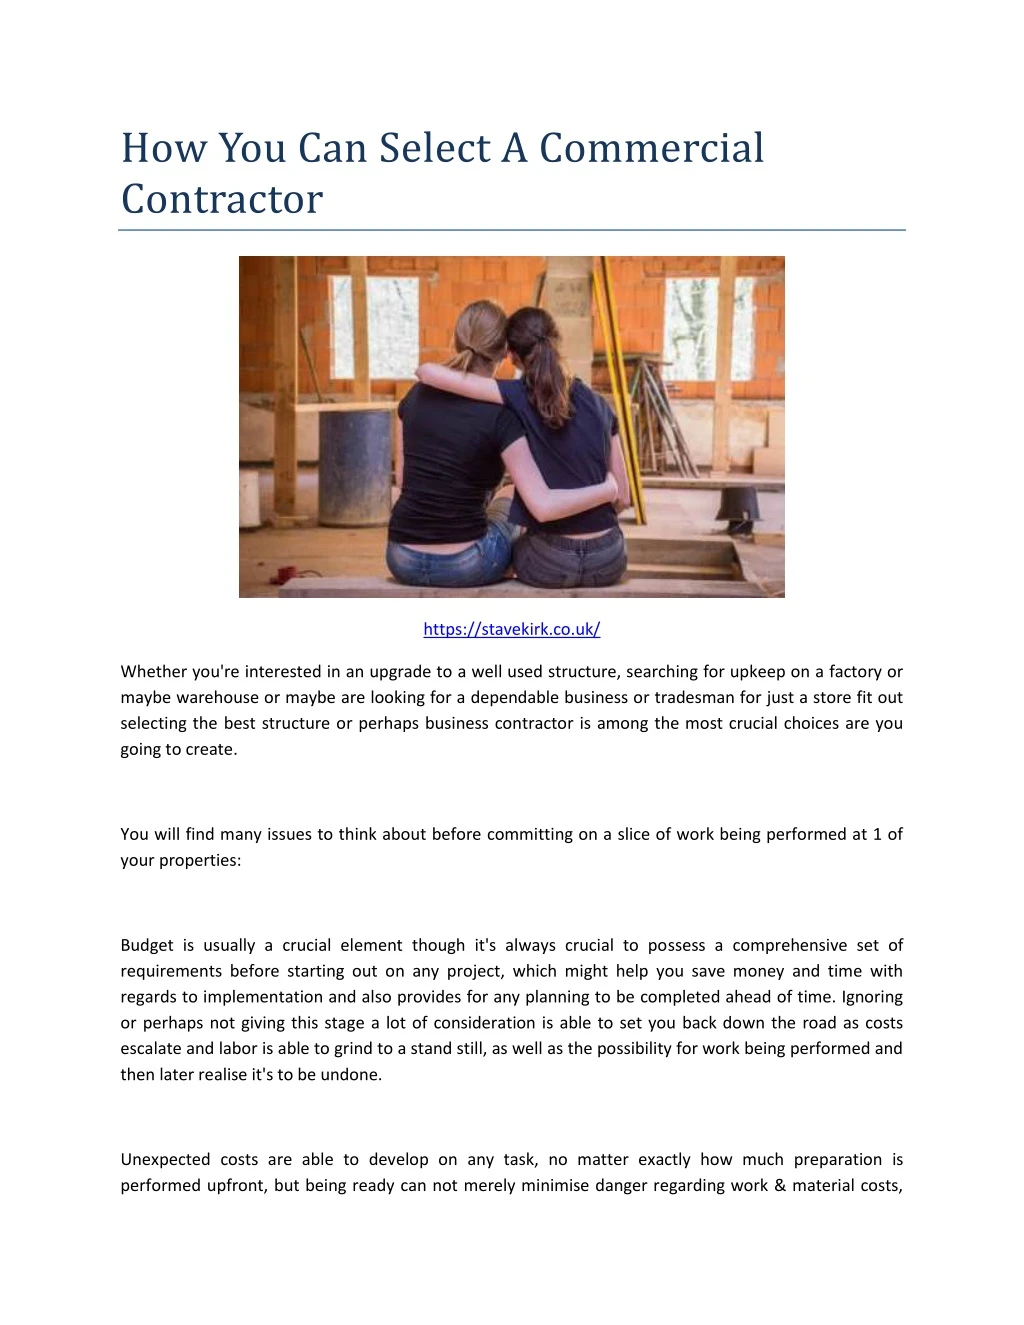 how you can select a commercial contractor